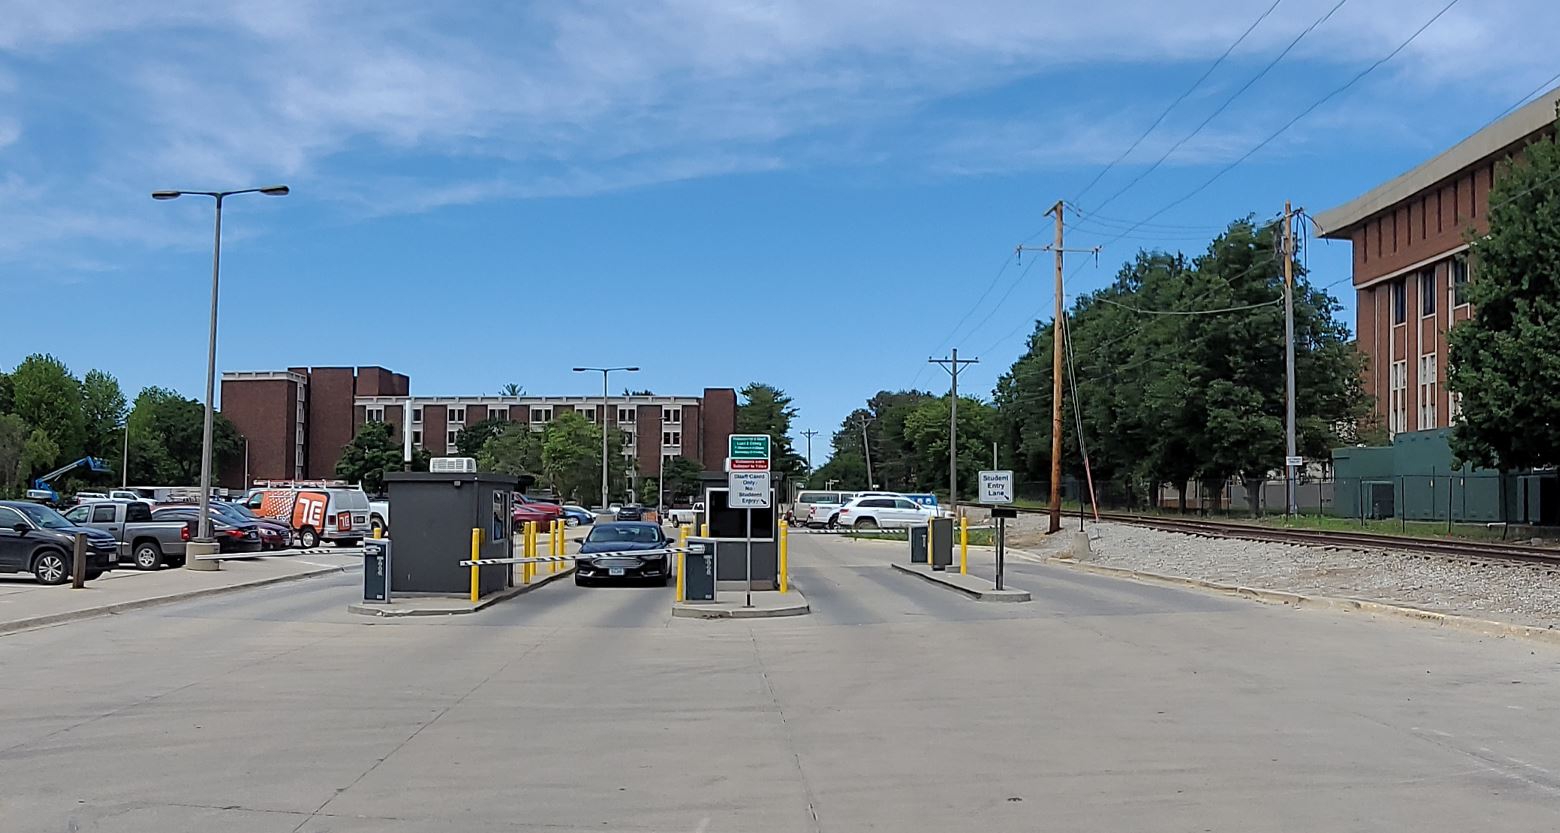 Surface parking lot with two entry lanes and two exit lane on sunny partly cloudy summer day